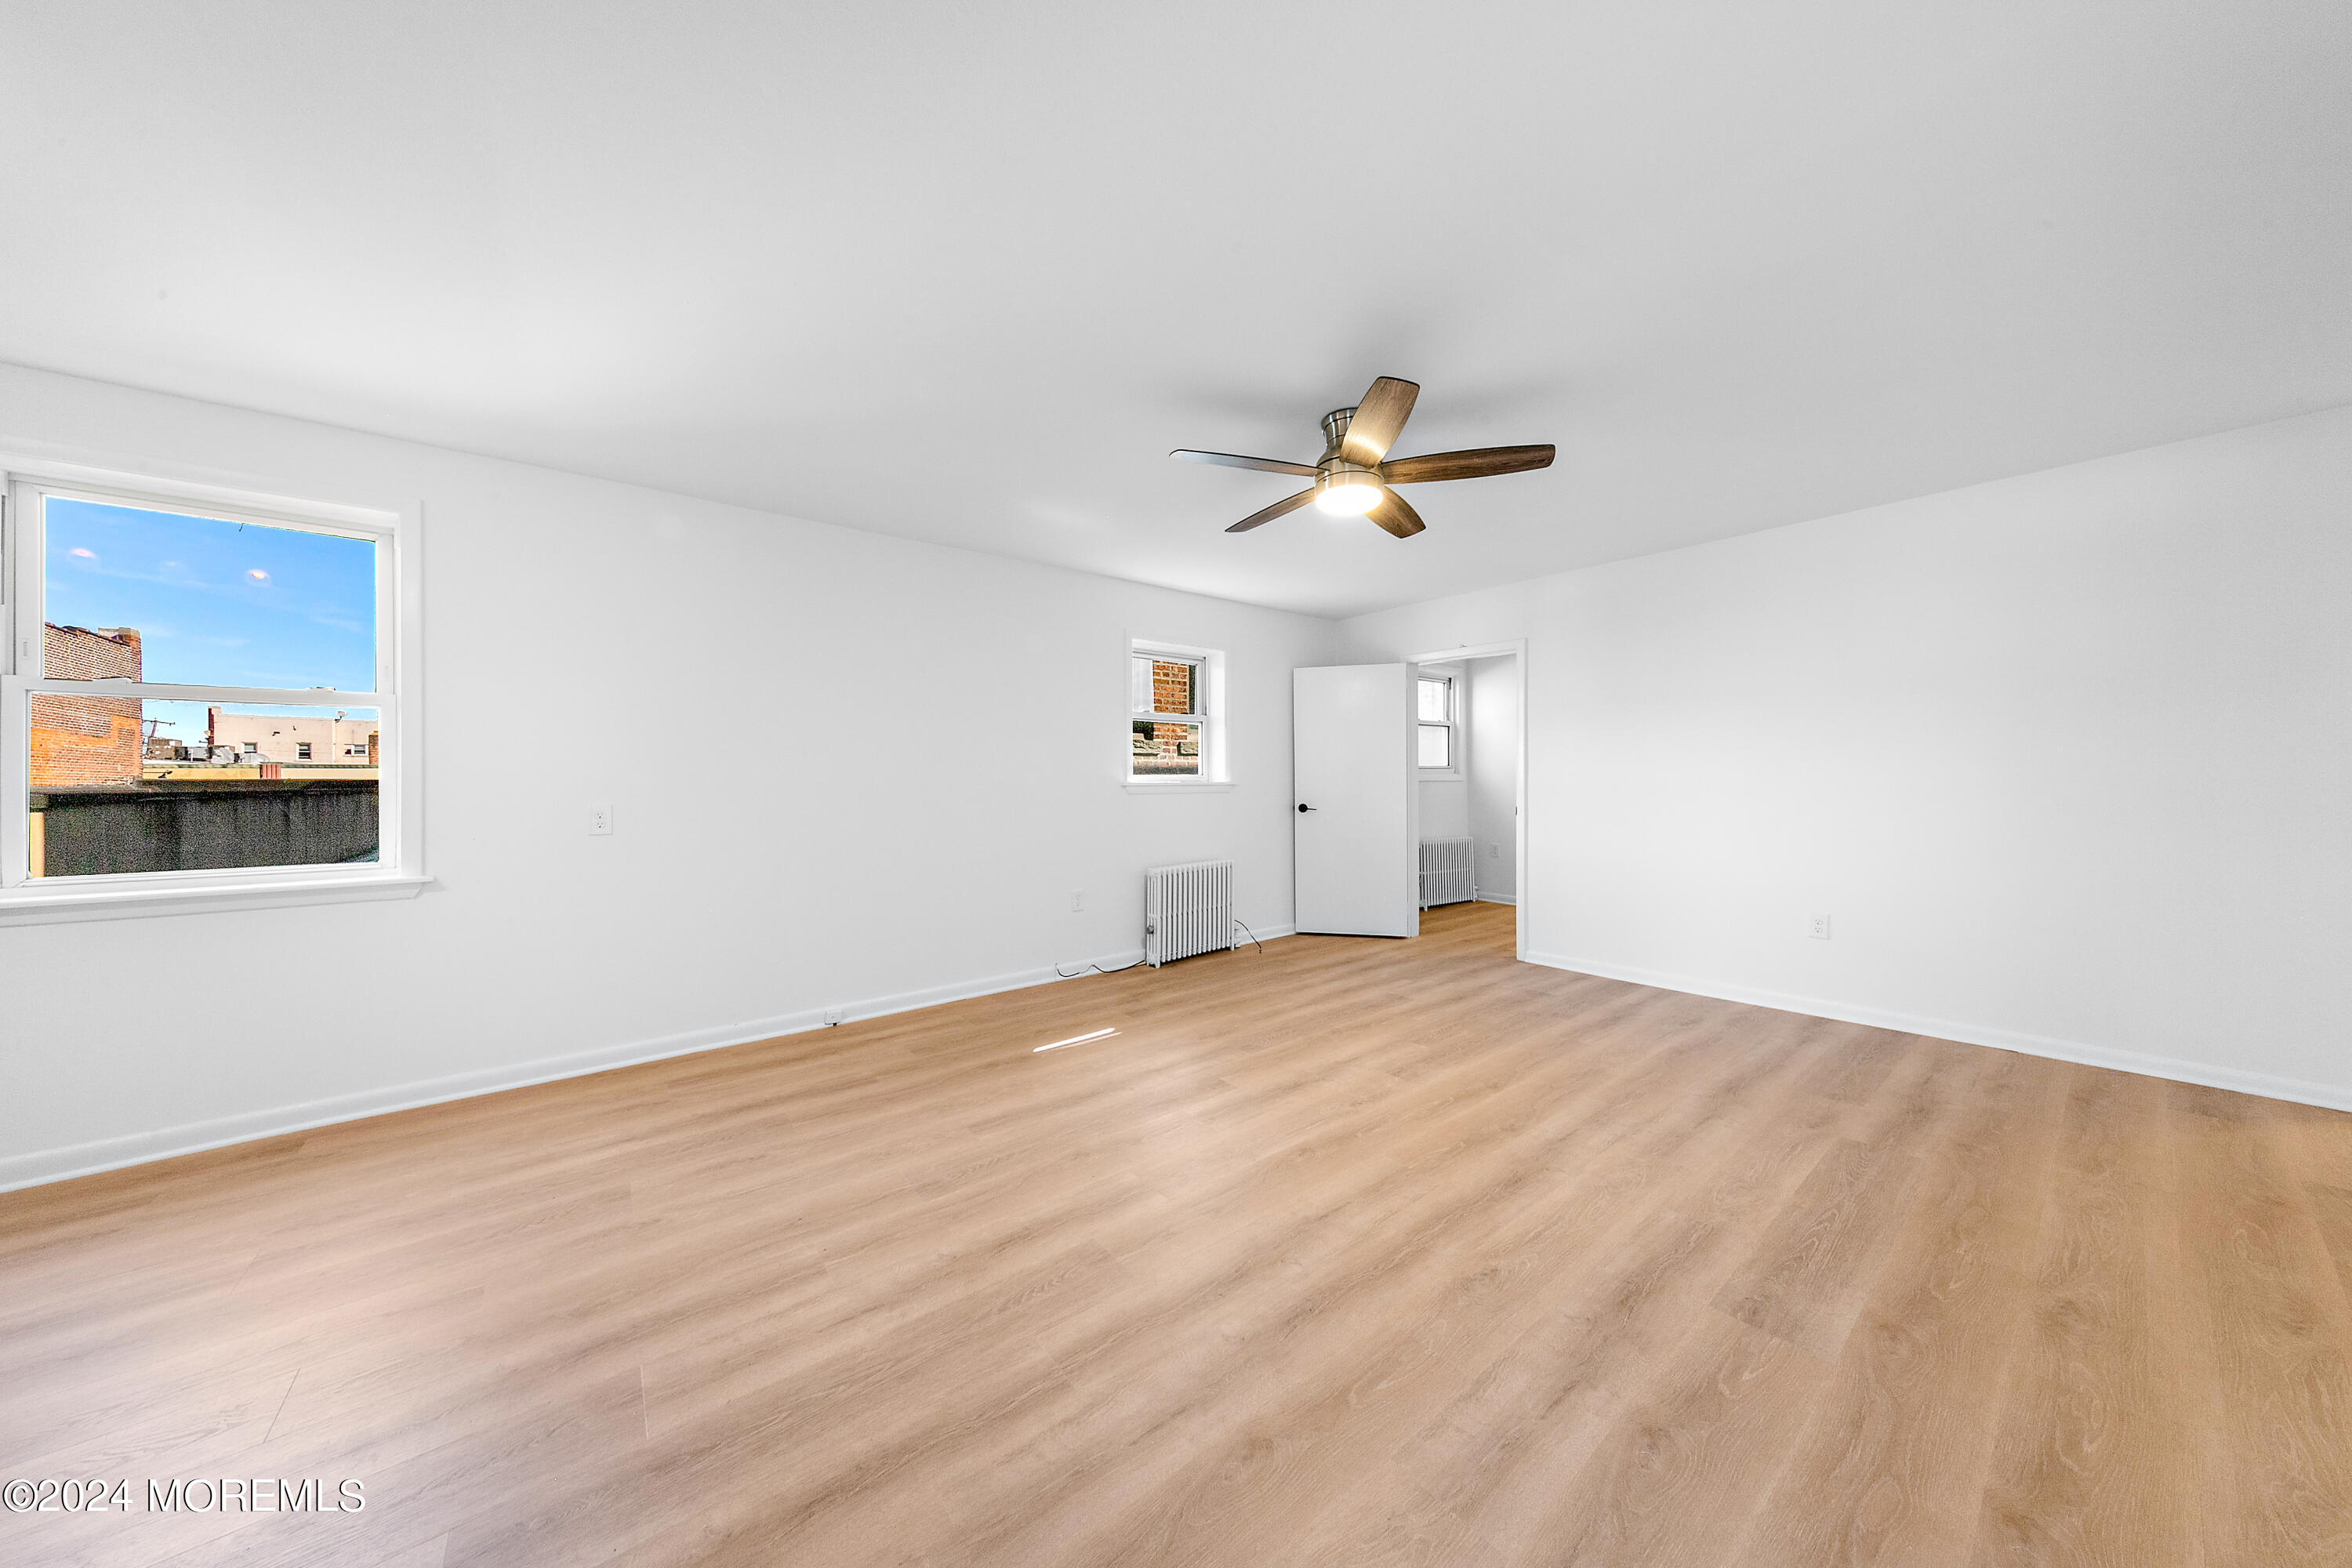 a view of empty room with ceiling fan